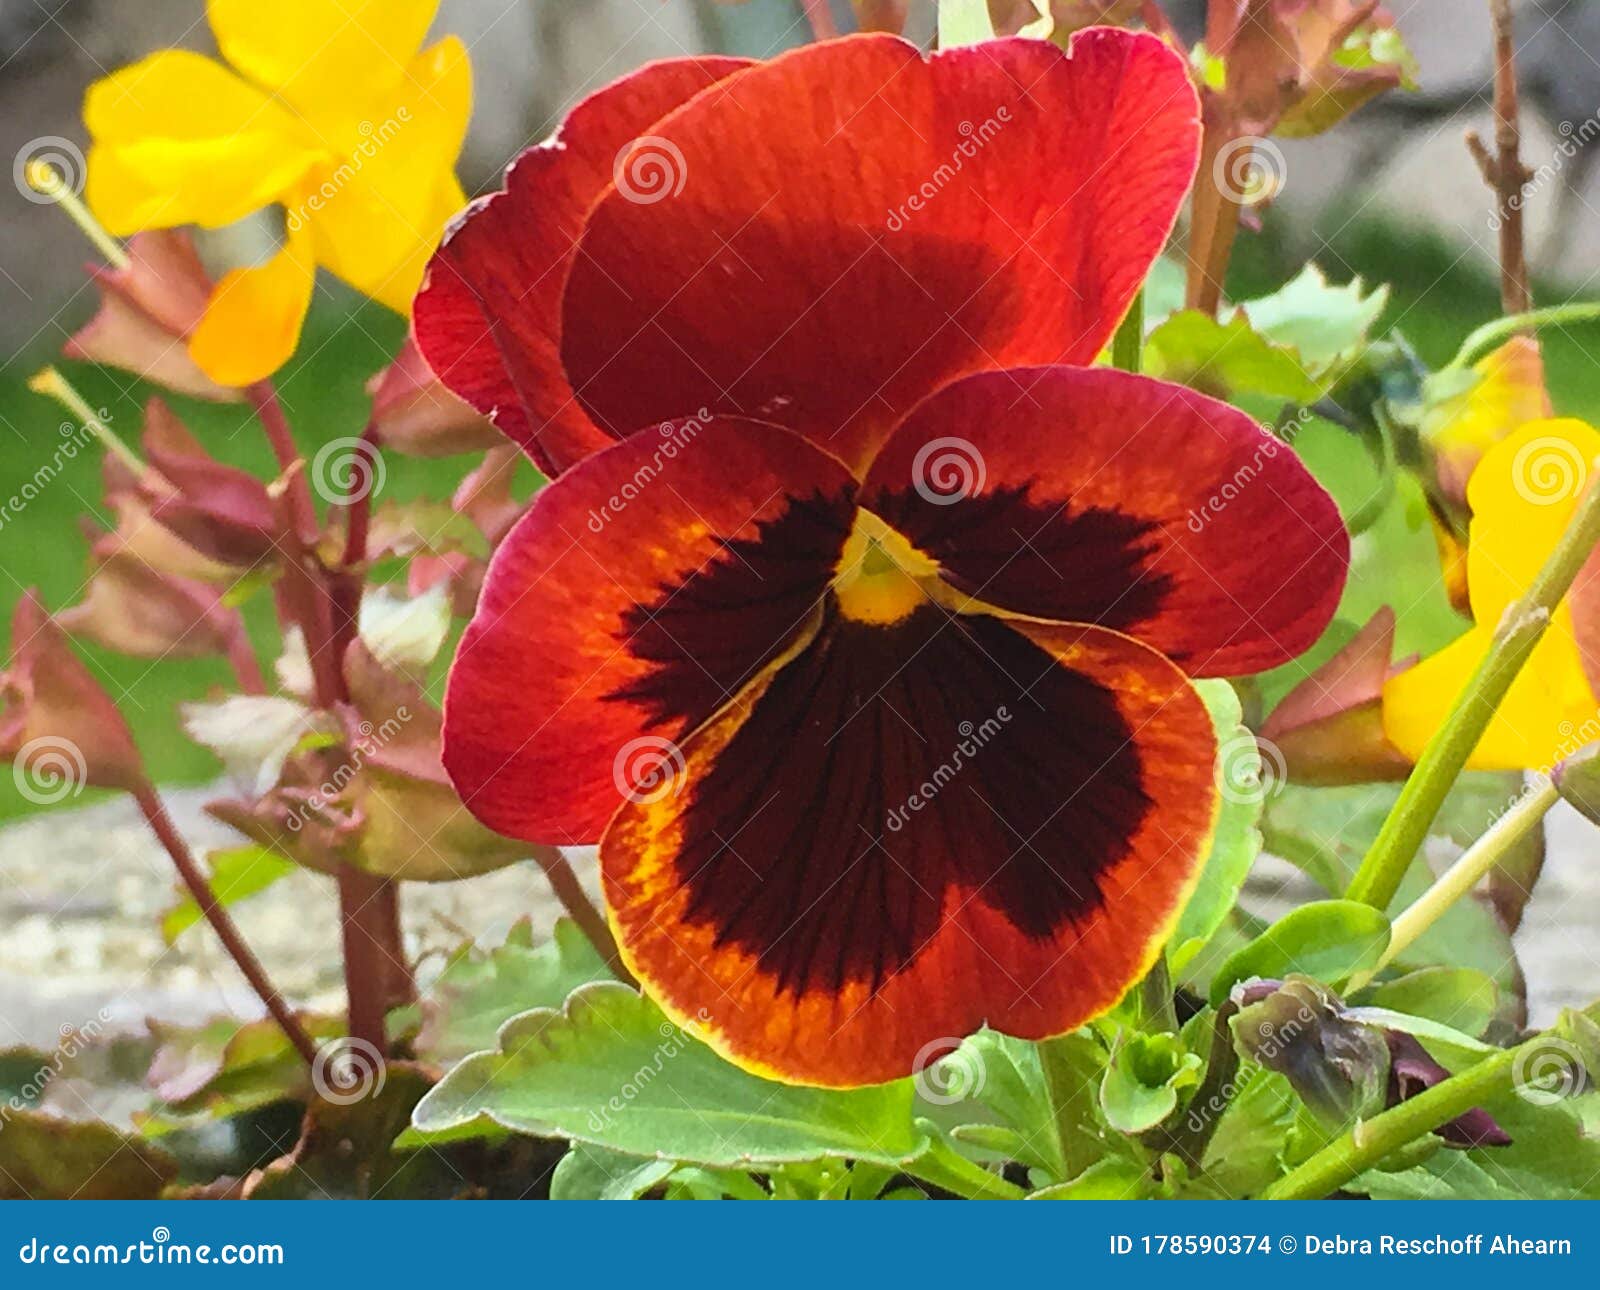 Red Tricolor Viola Pansy Flower in Full Bloom Stock Photo - Image of ...